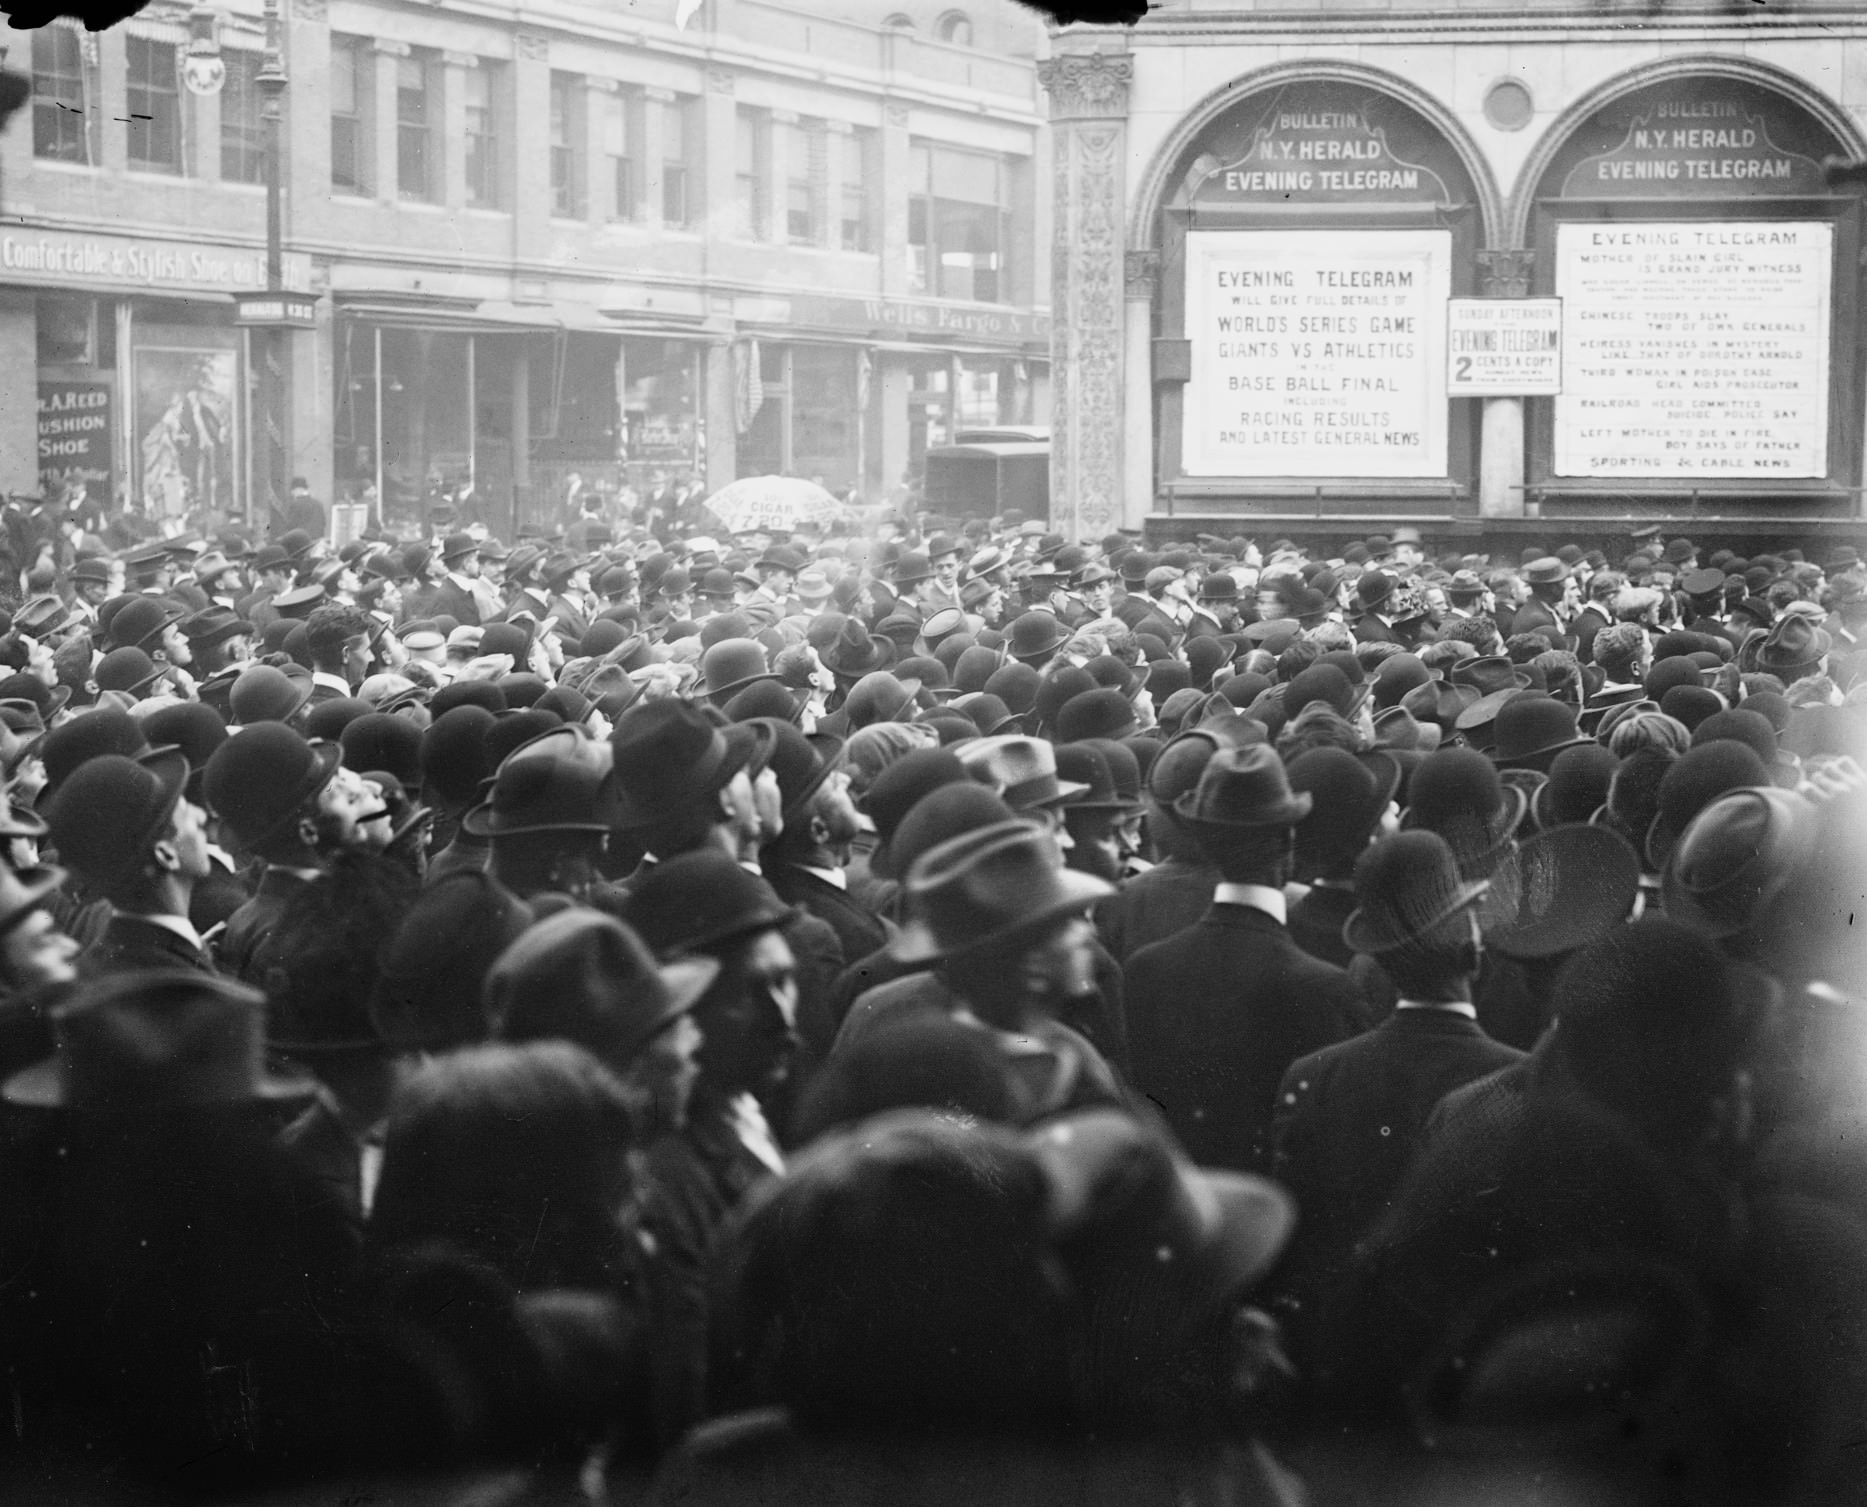 Baseball fans congregate outside the New York Herald Building during the 1911 World Series